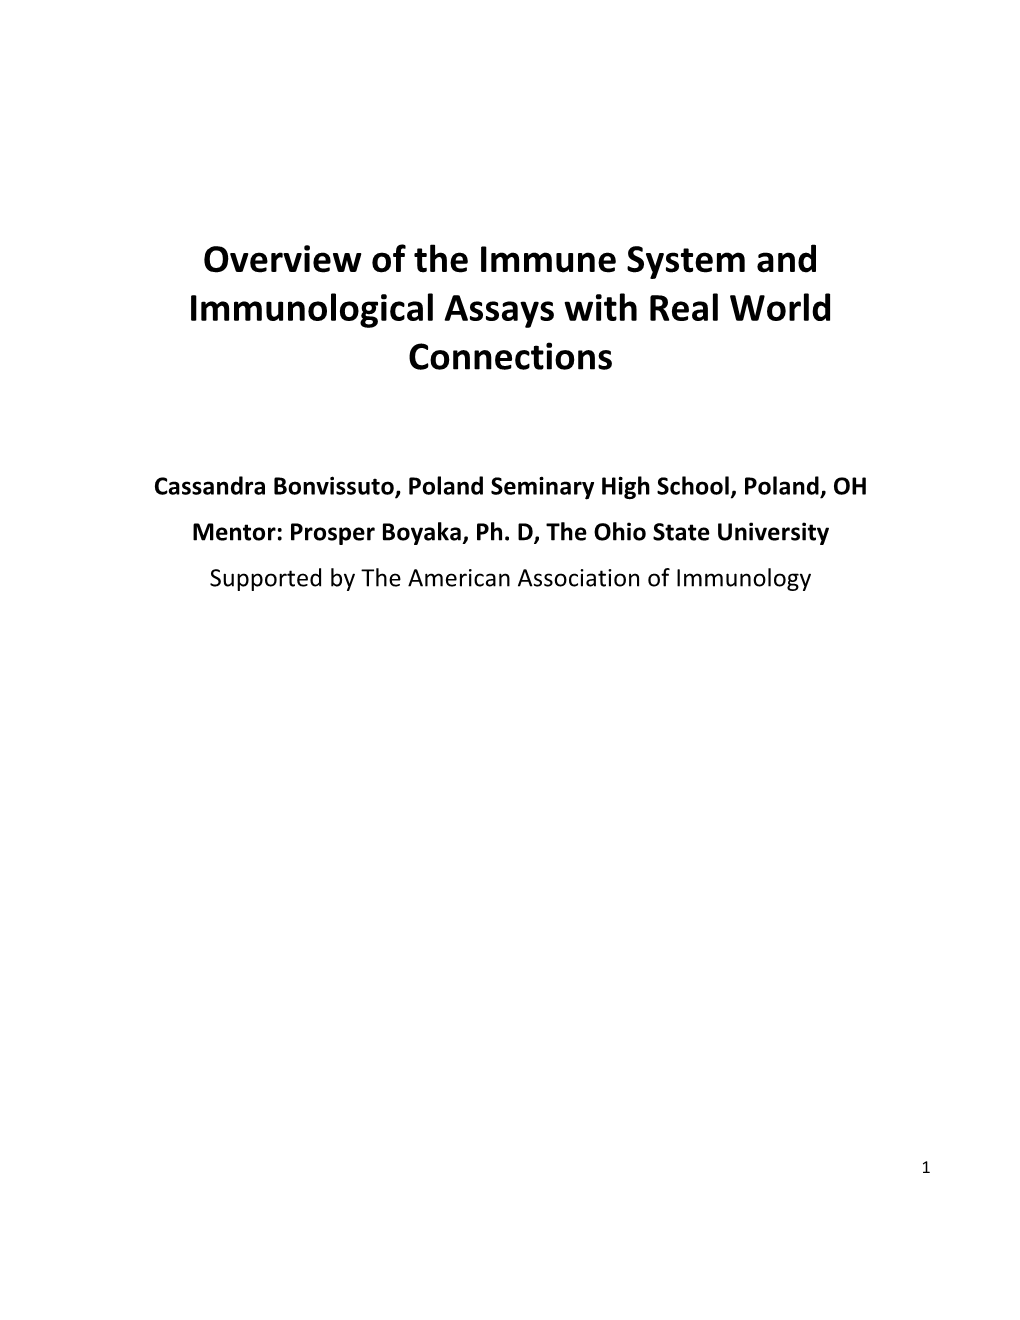 Overview of the Immune System and Immunological Assays with Real World Connections